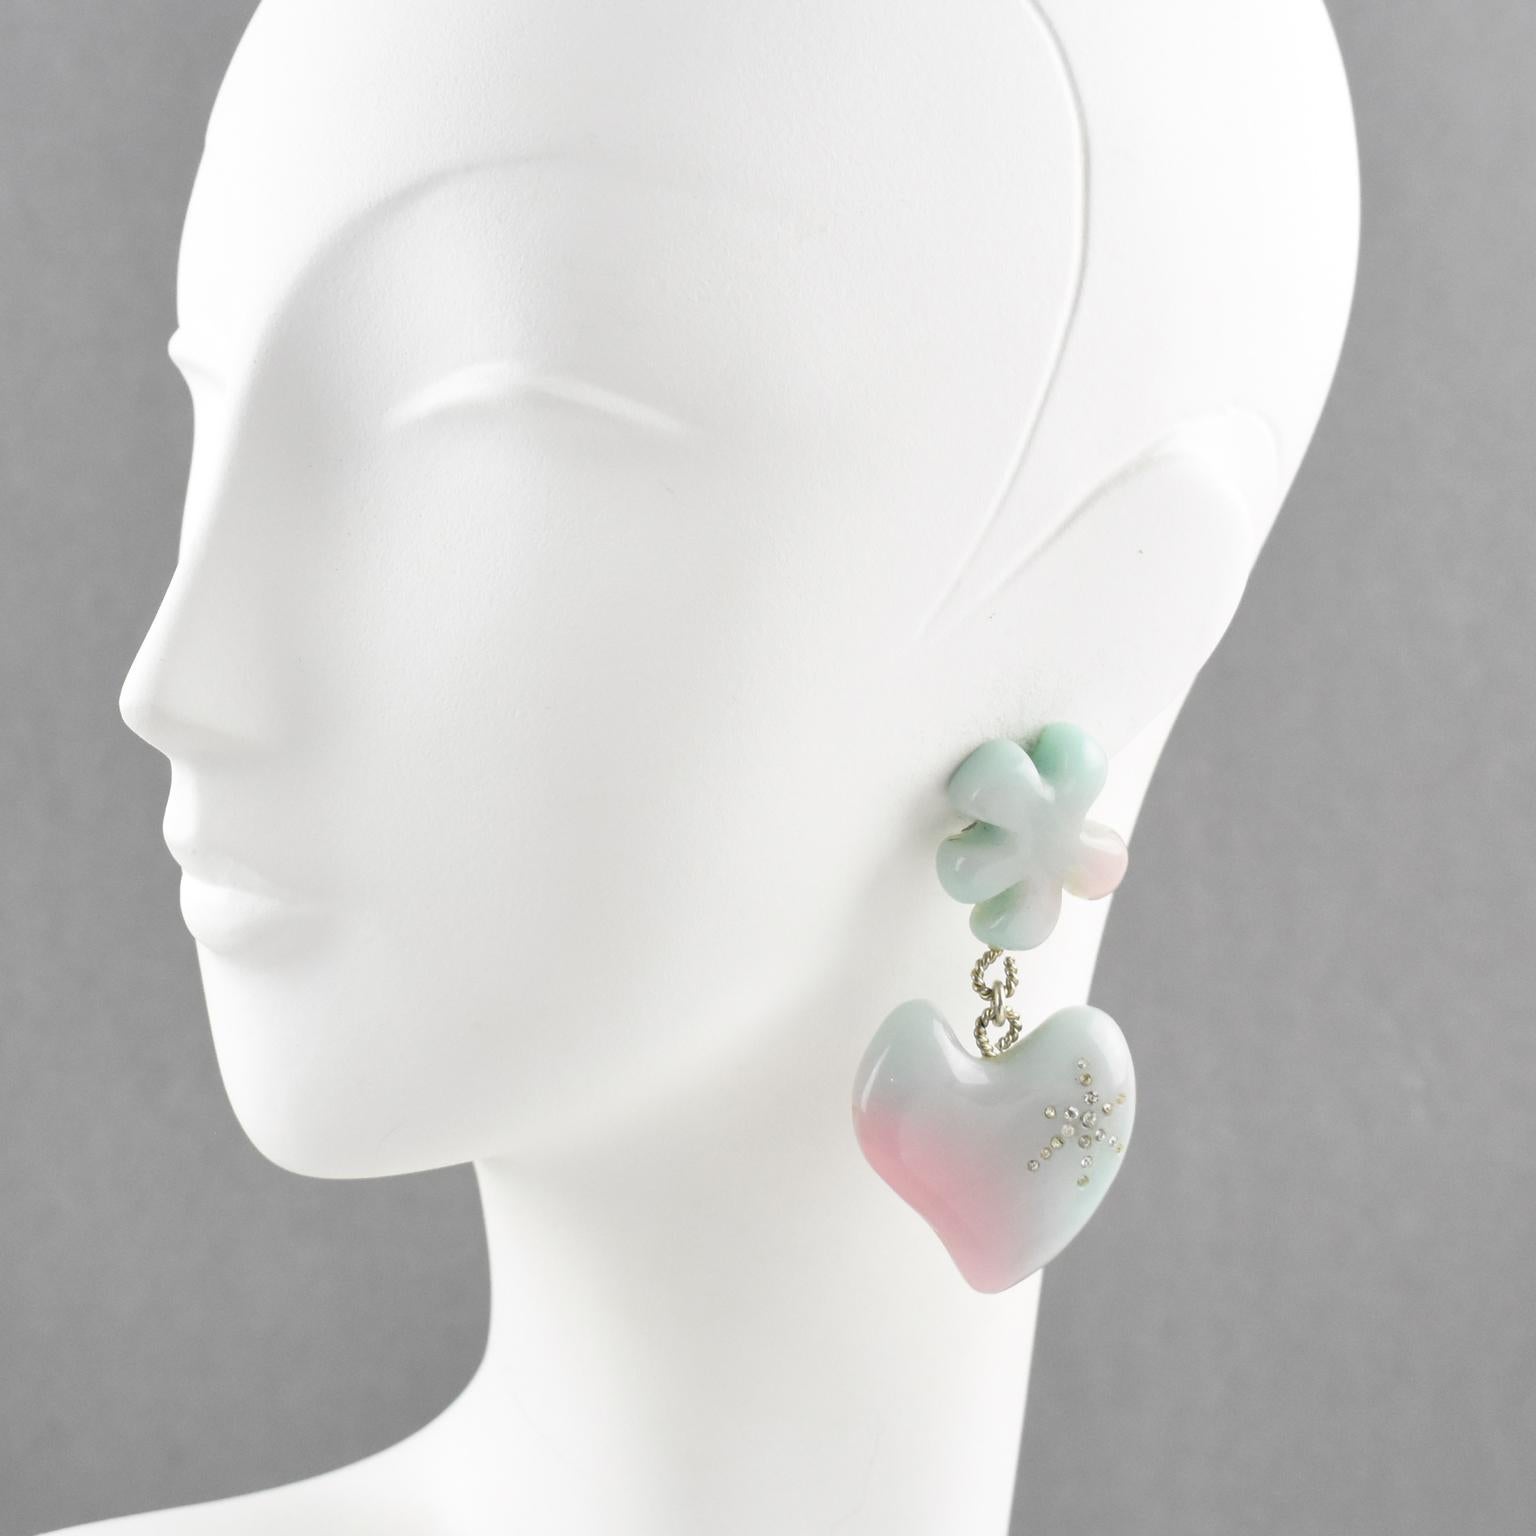 Lovely Christian Lacroix Paris signed clip on earrings. Oversized pastel colors (green and pink marble) resin dangling shape, featuring abstract flower and heart ornate with crystal clear rhinestones. Silvered metal hardware. Signed on gilded tag at